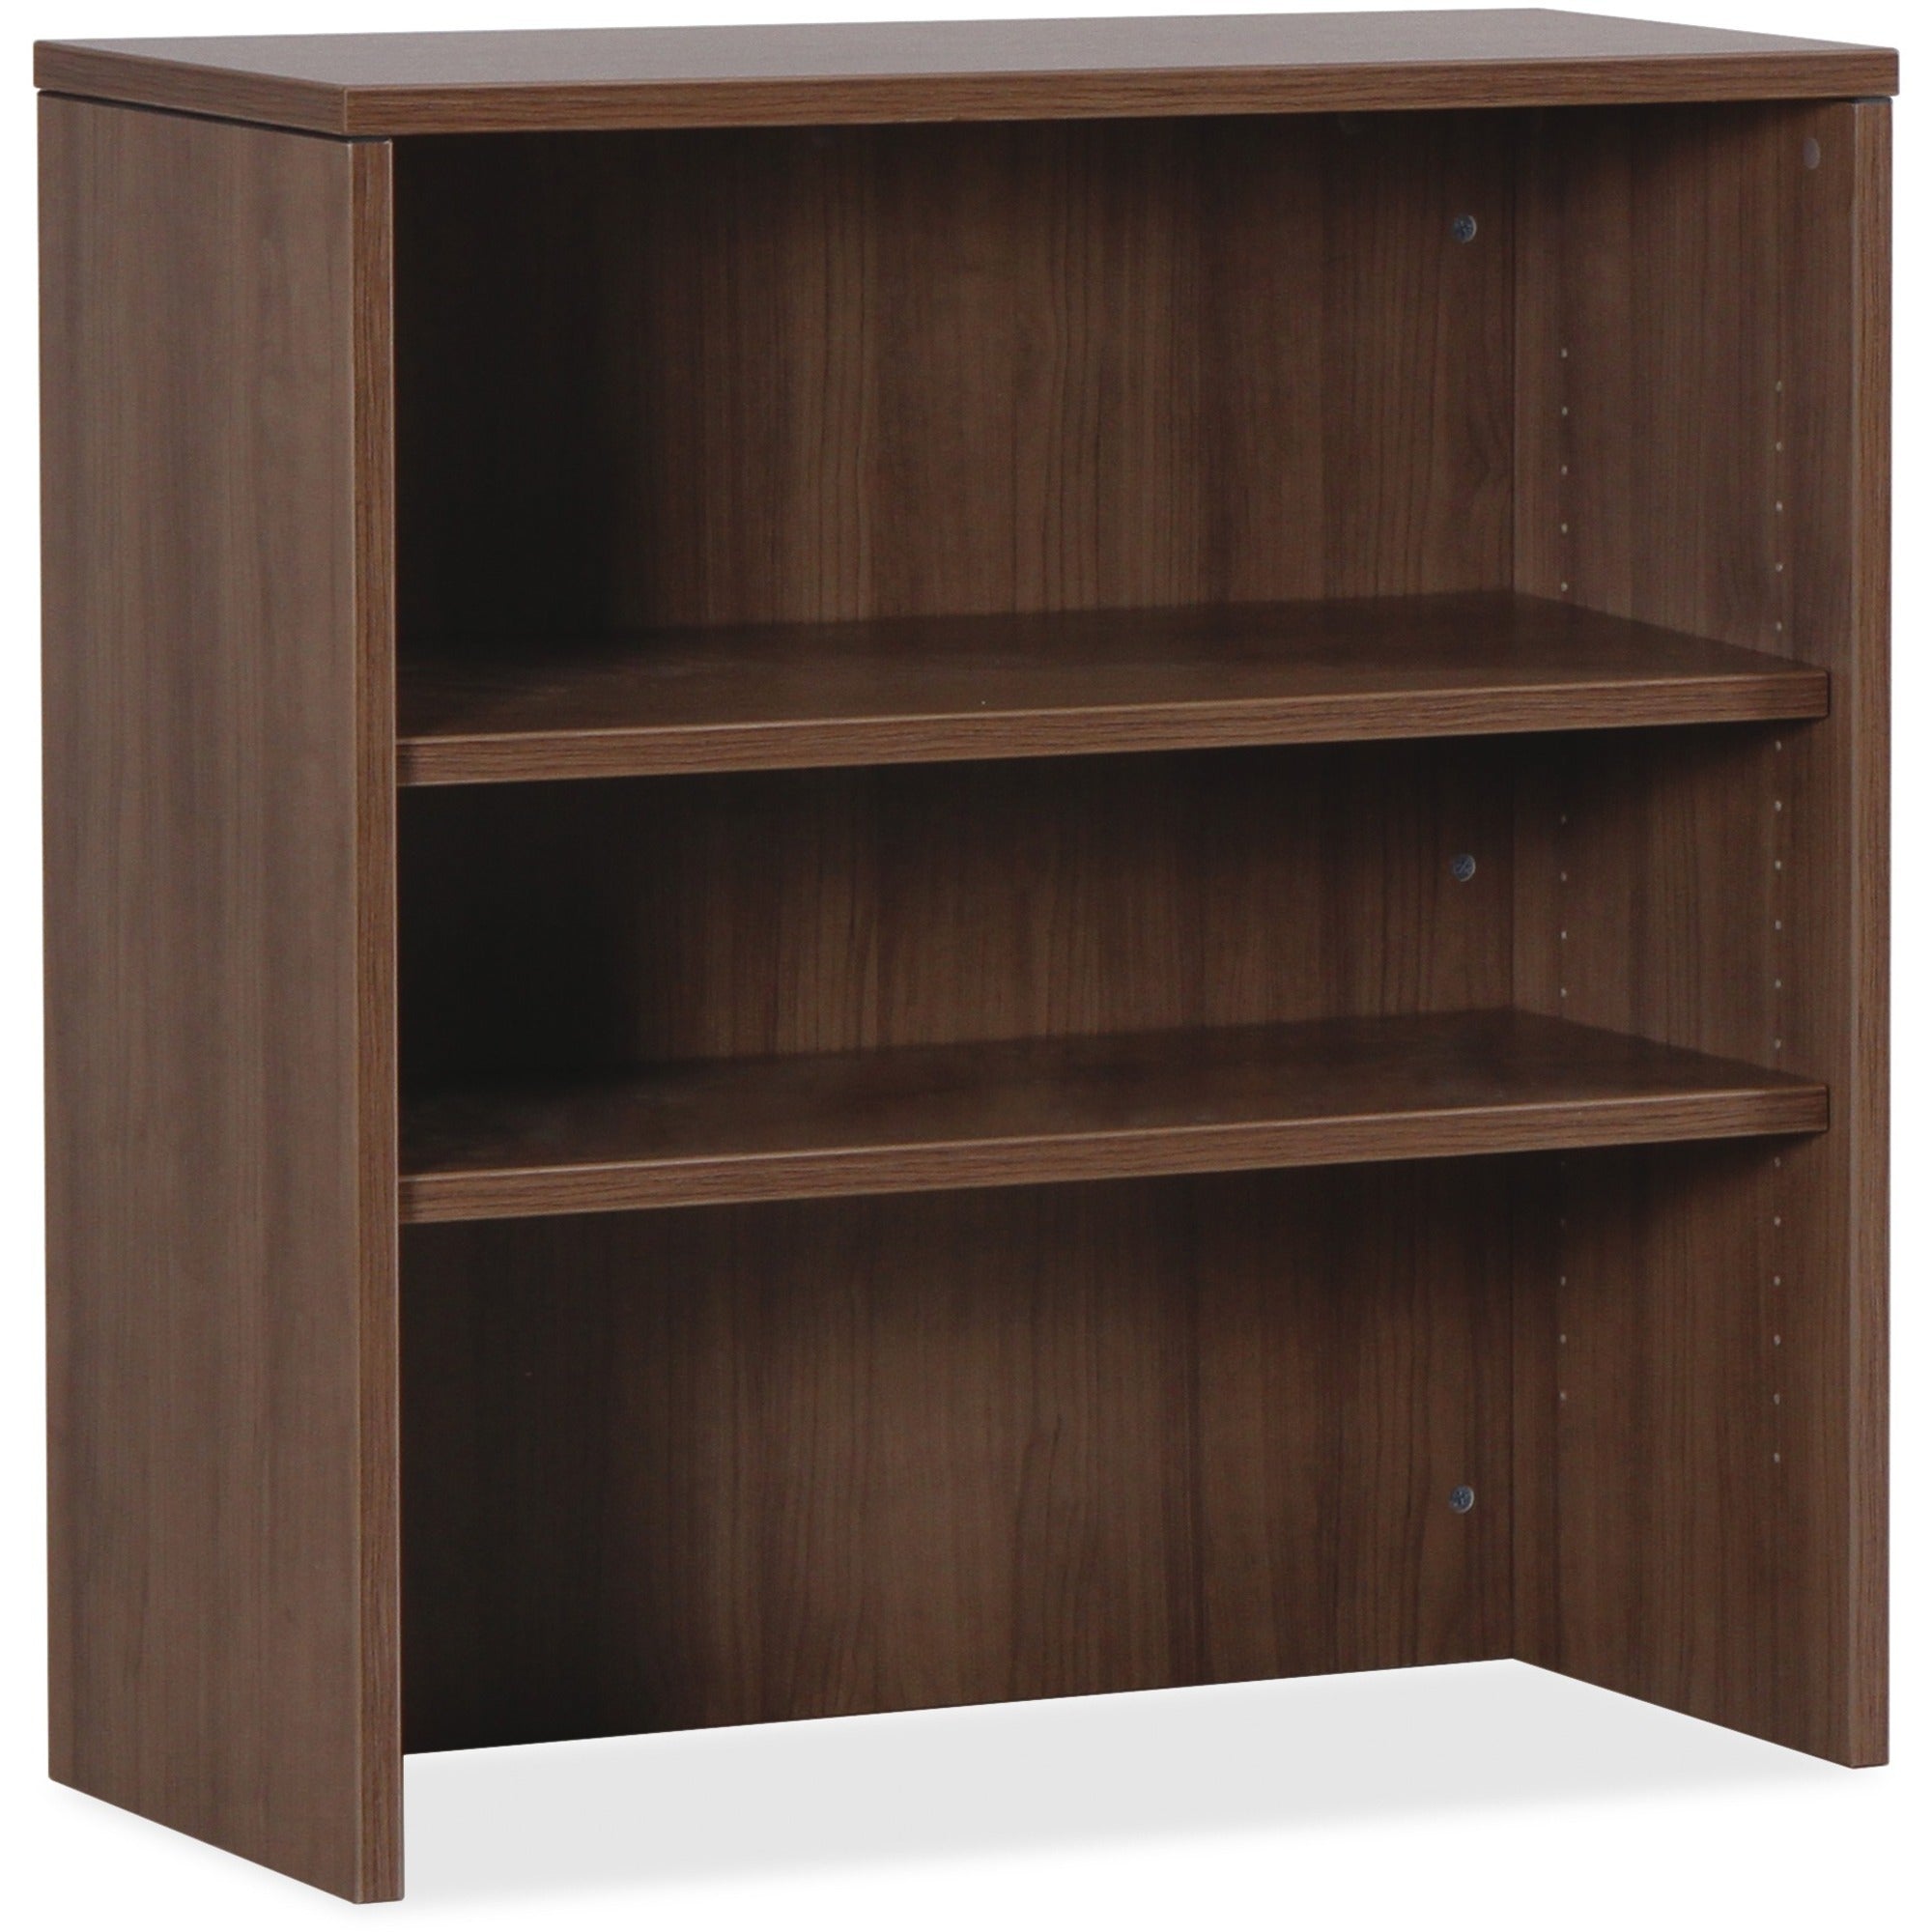 Lorell Essentials Series Stack-on Bookshelf - 36" x 15"36" - 2 Shelve(s) - Material: MFC, Polyvinyl Chloride (PVC) - Finish: Walnut, Laminate - Stackable - For Office, Book, Binder, Display Screen - 